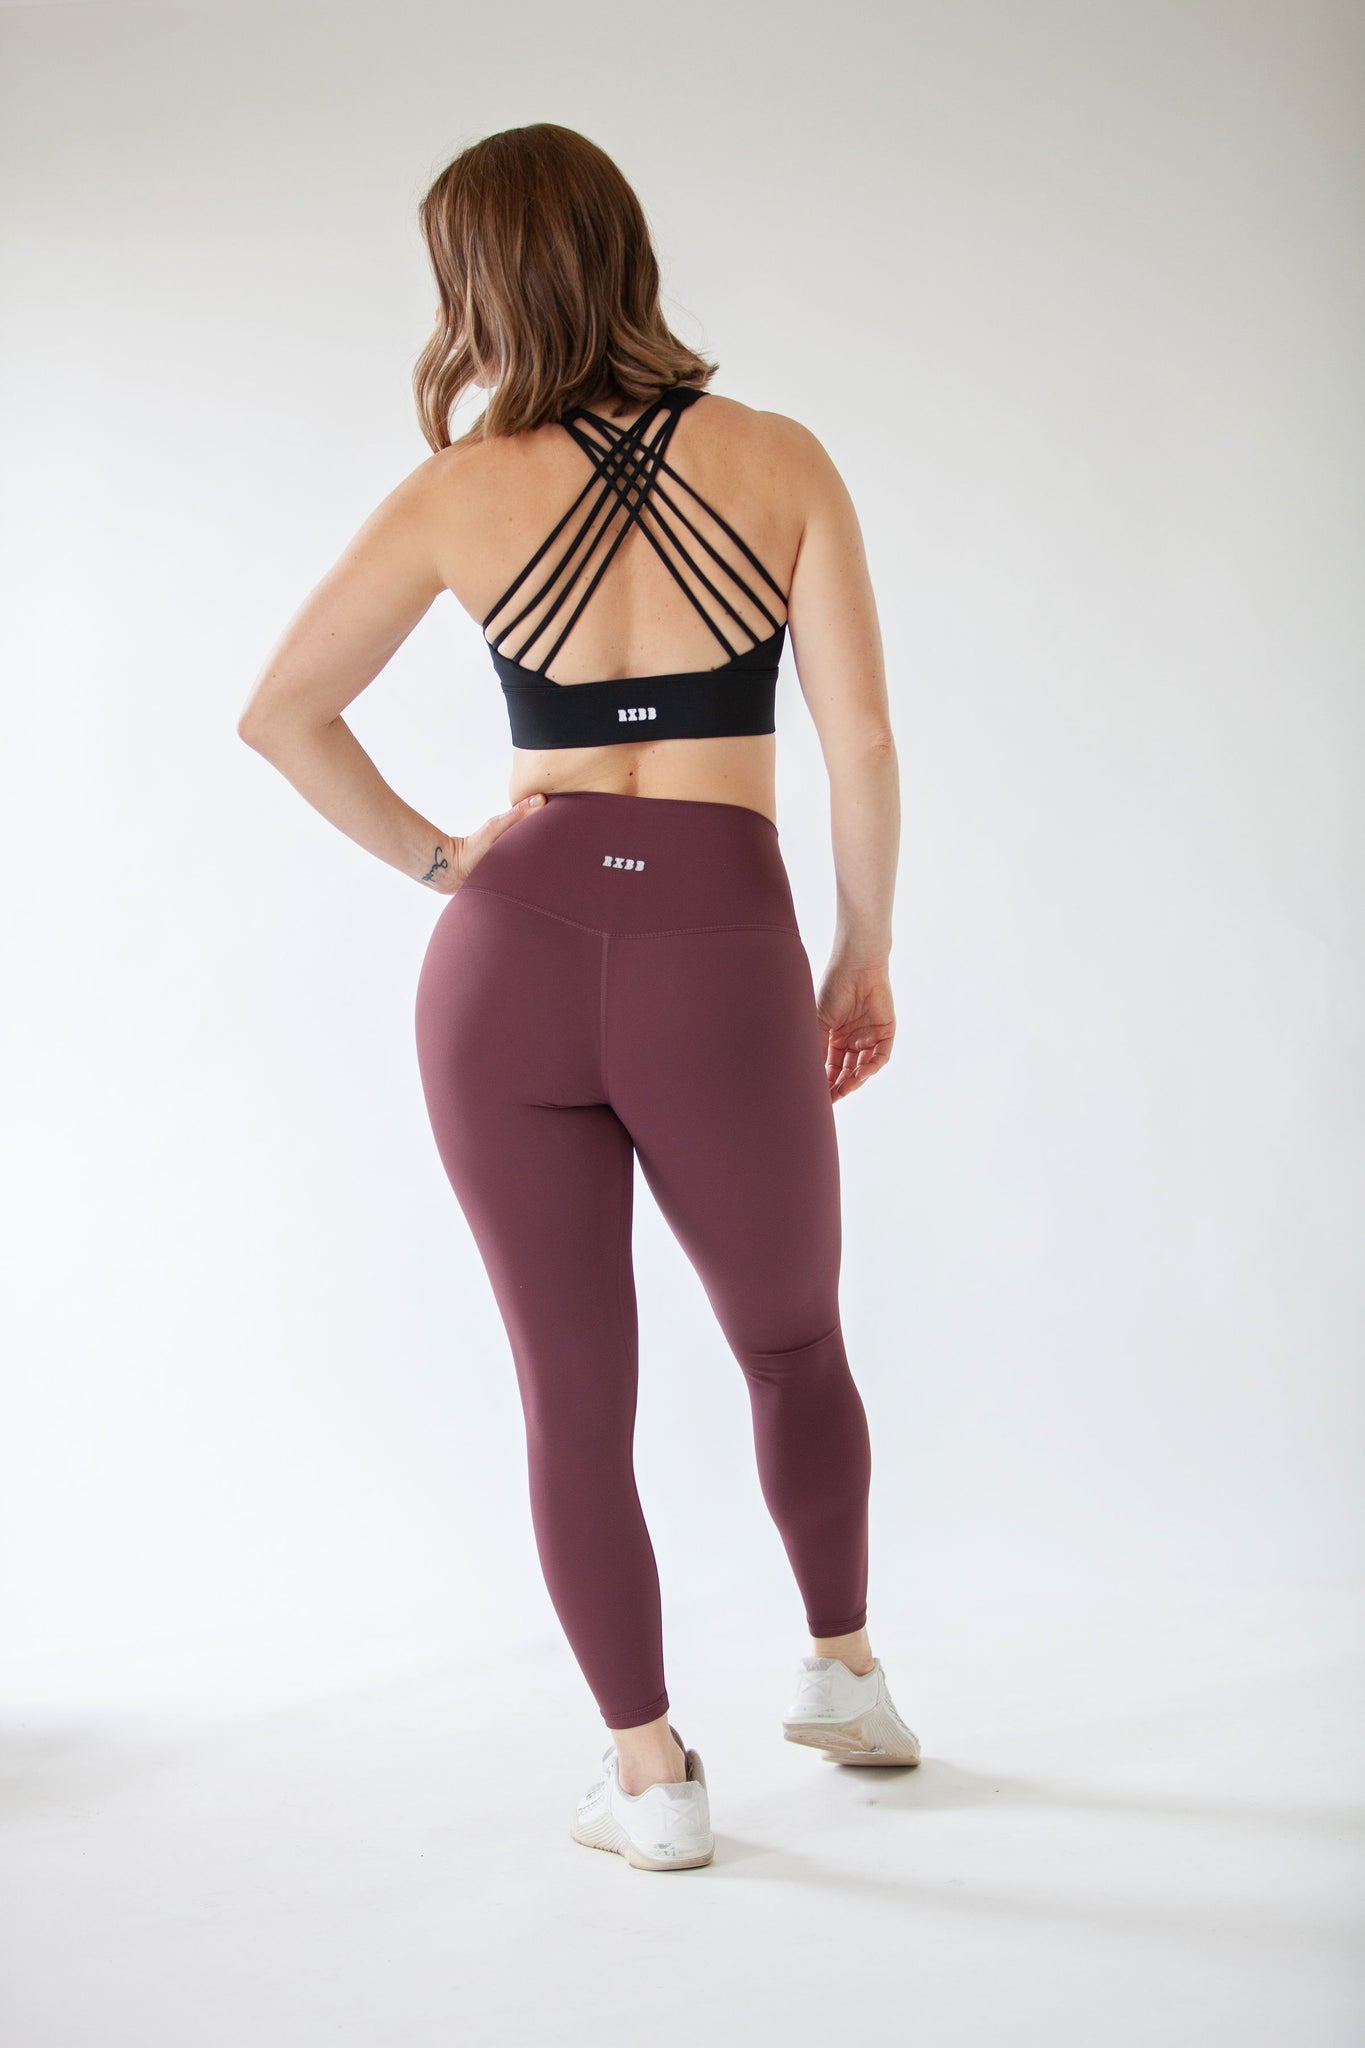 Buy Maroon Knitted Cotton Blend Yoga Pants (Yoga Pants) for INR599.00